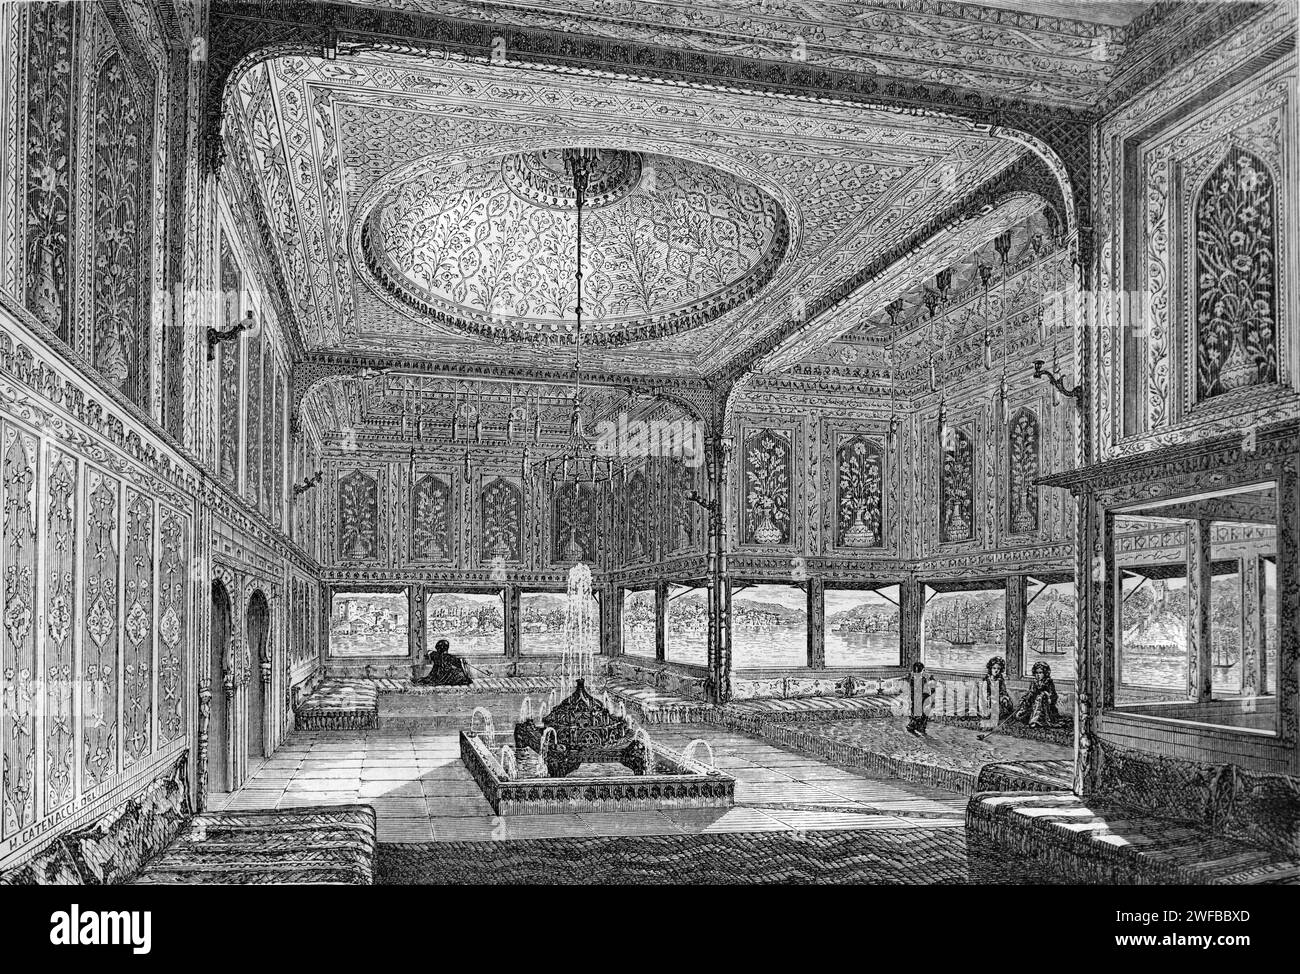 Interior of Kiosk overlooking the Bosphorus or Golden Horn in the Topkapi Palace Istanbul Turkey. Vintage or Historic Enbraving of Illustration 1862. Stock Photo